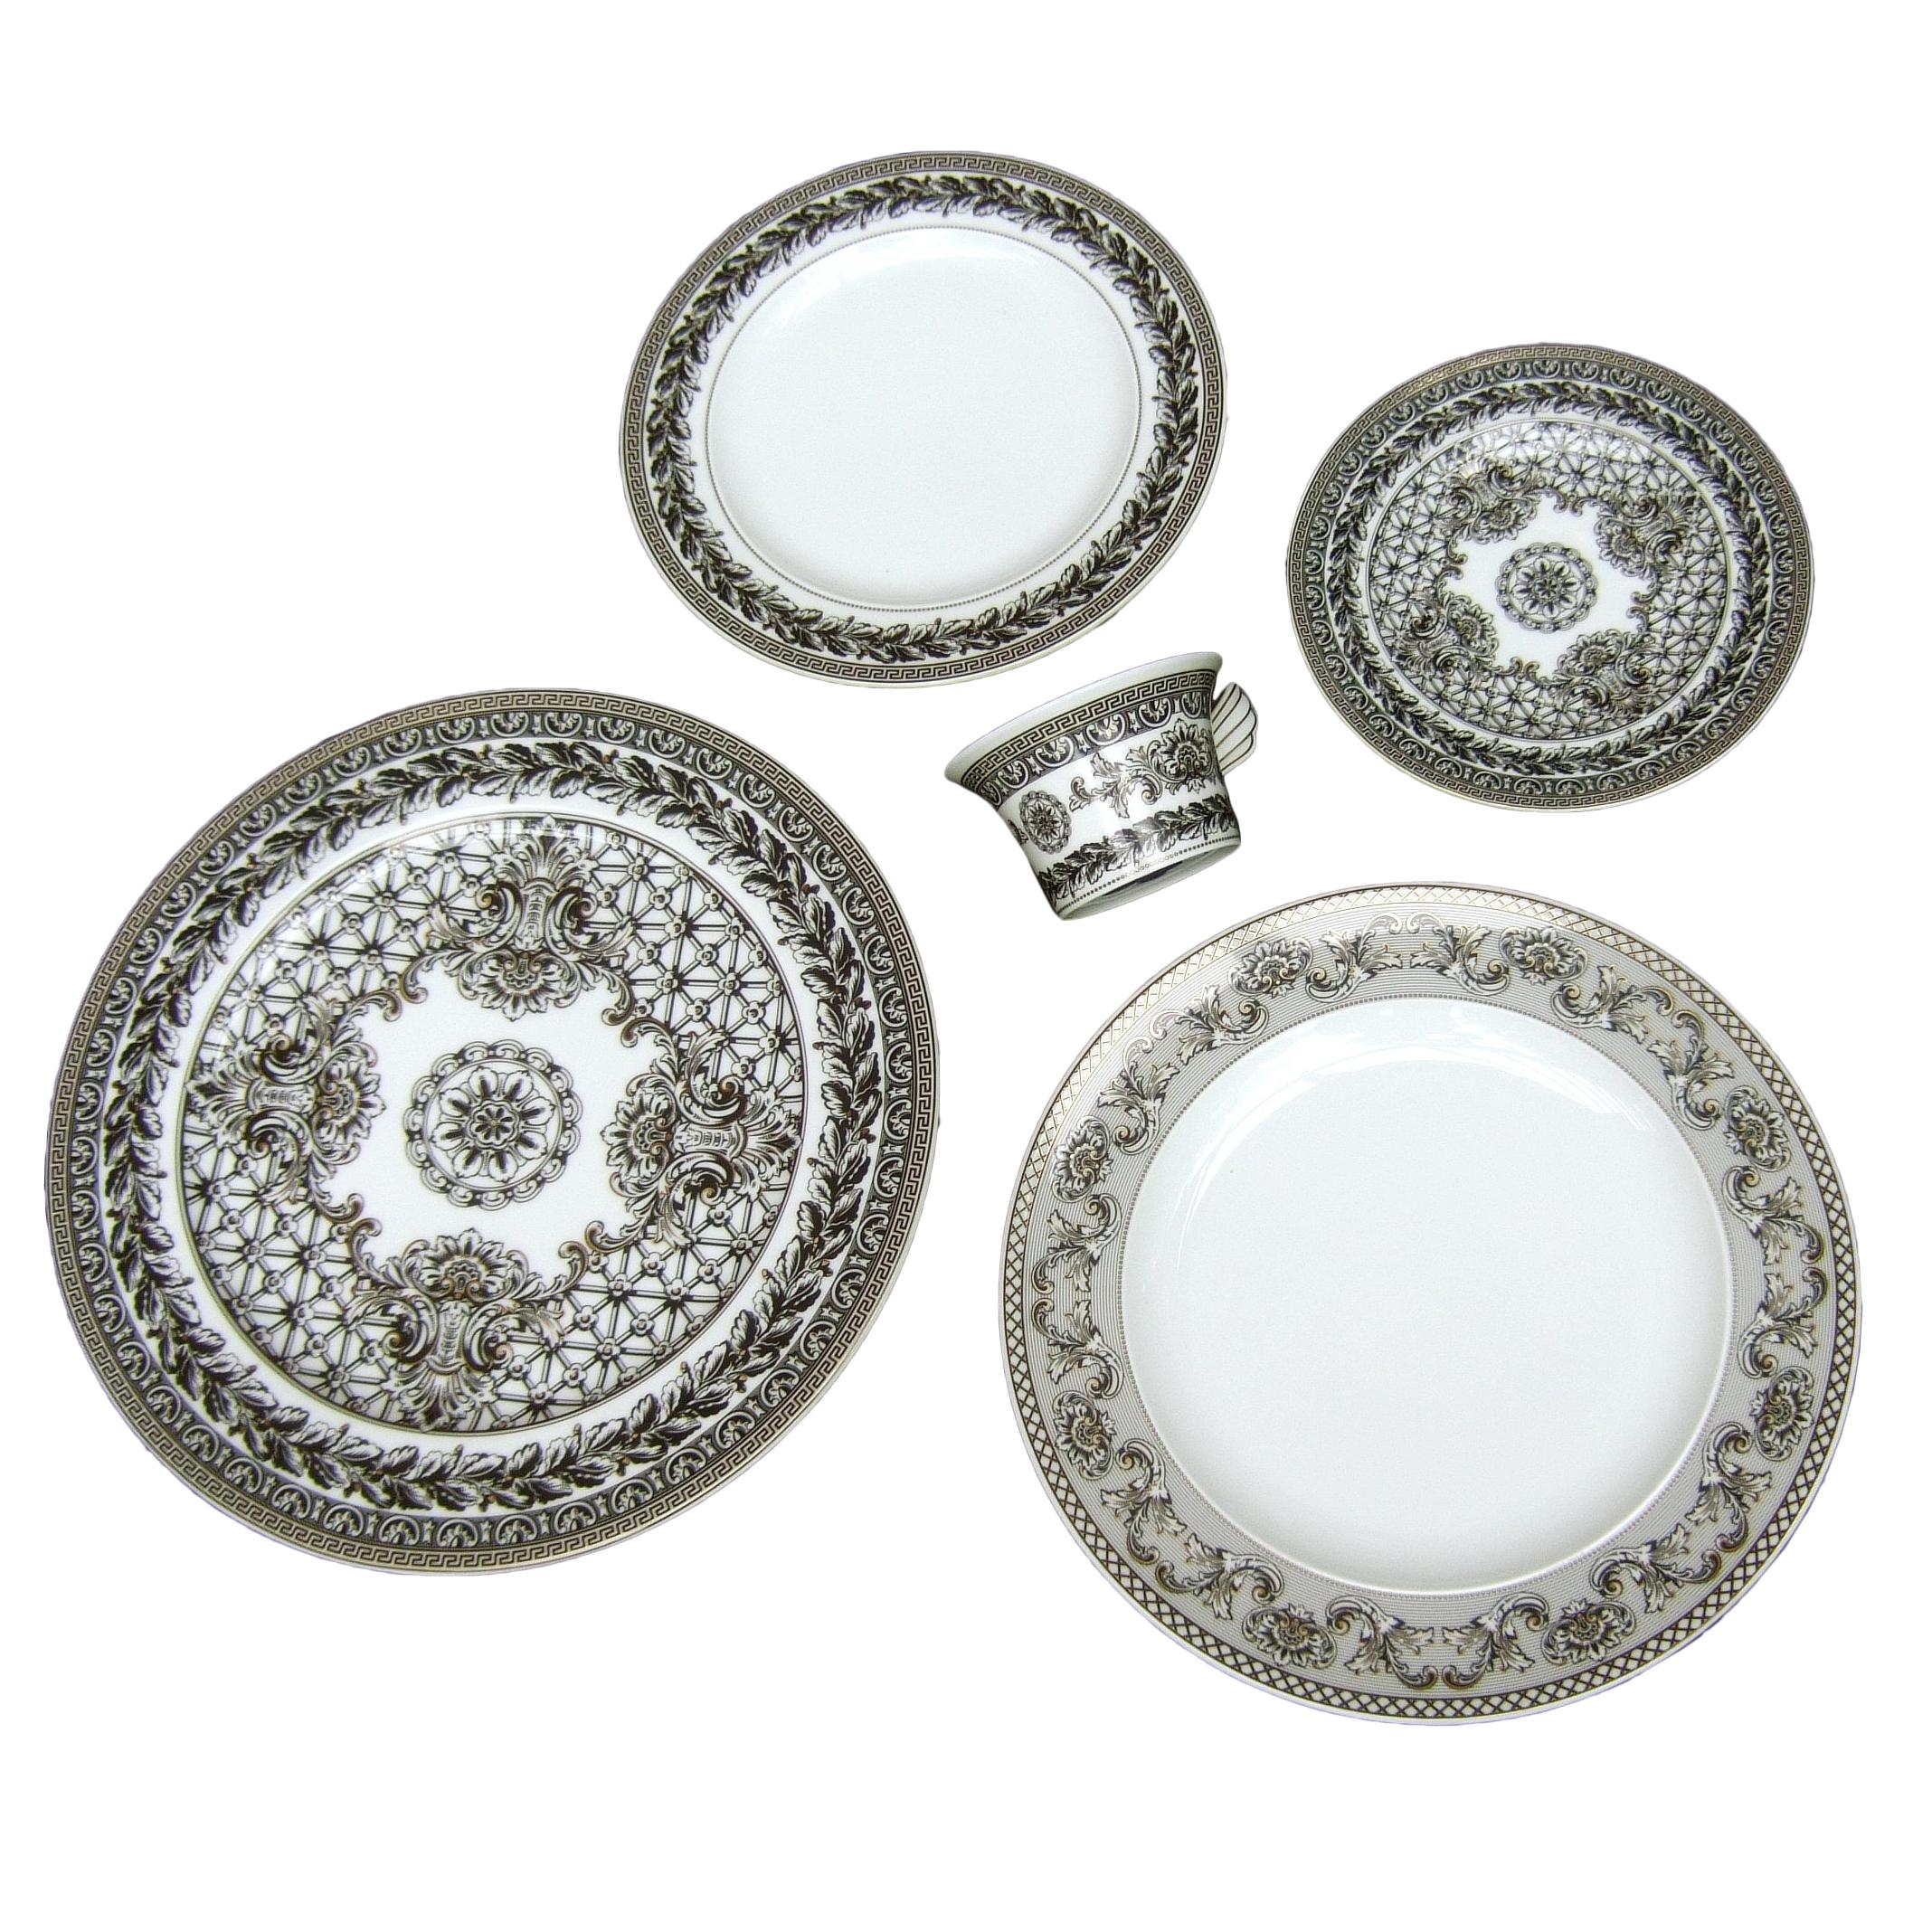 Collection of Four Versace for Rosenthal Porcelain Dining Plates circa 1990s